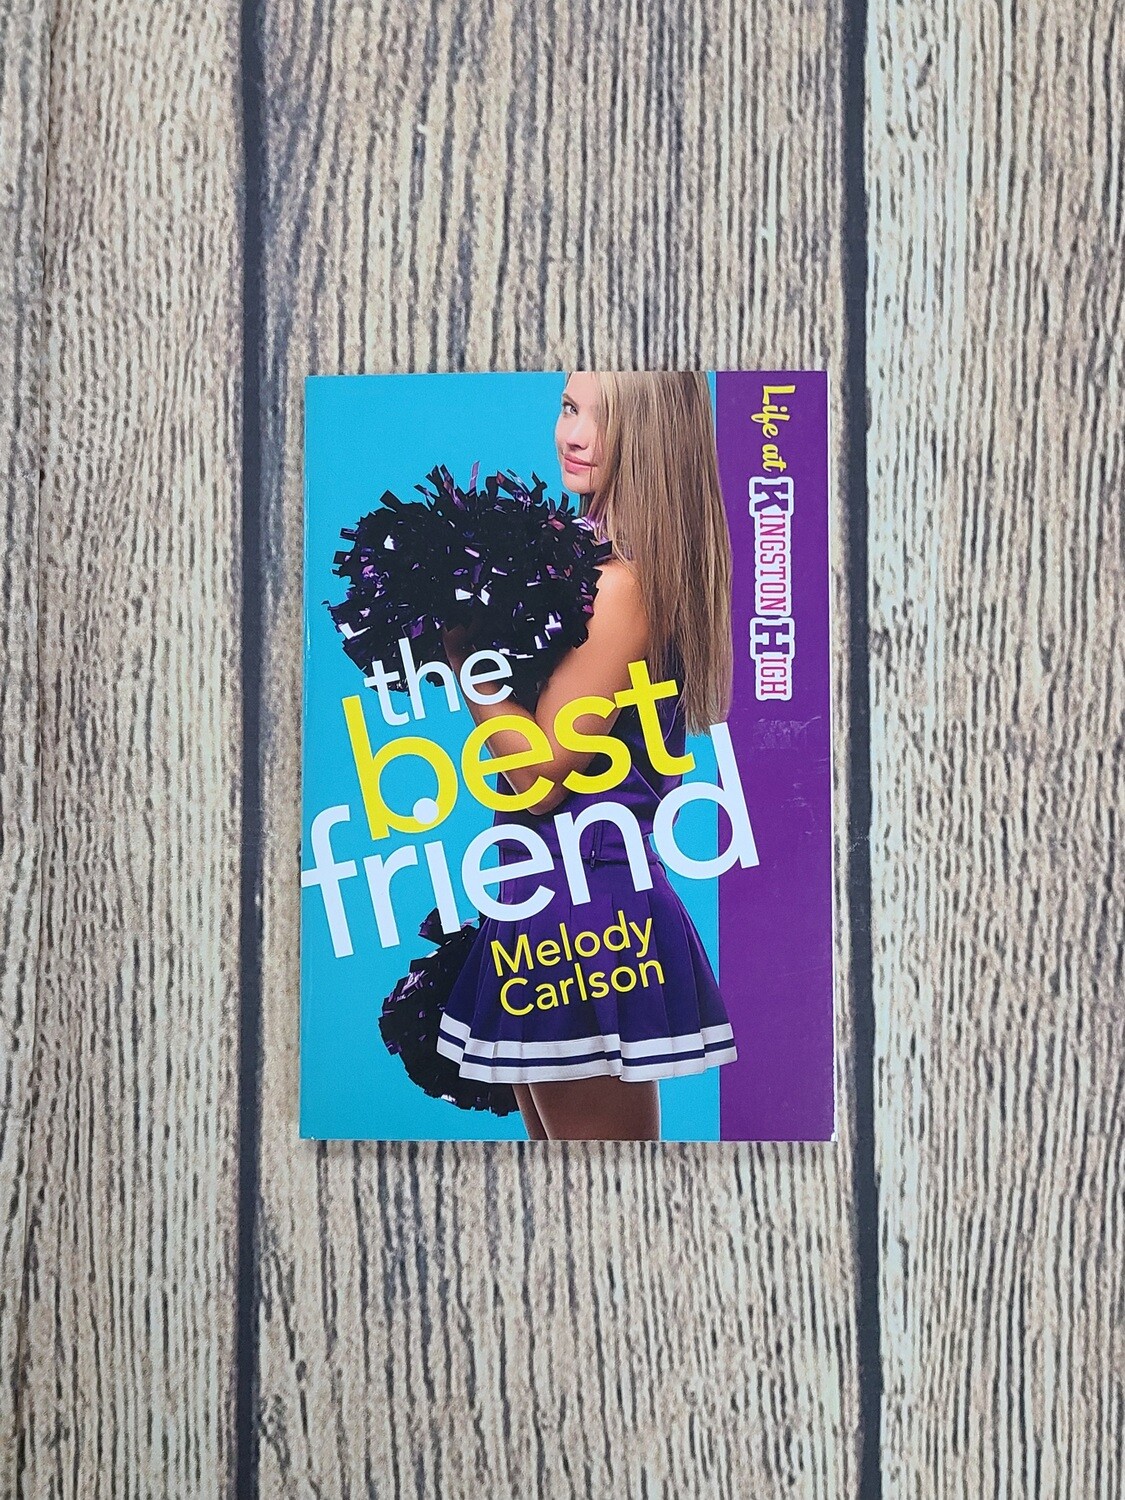 The Best Friend by Melody Carlson